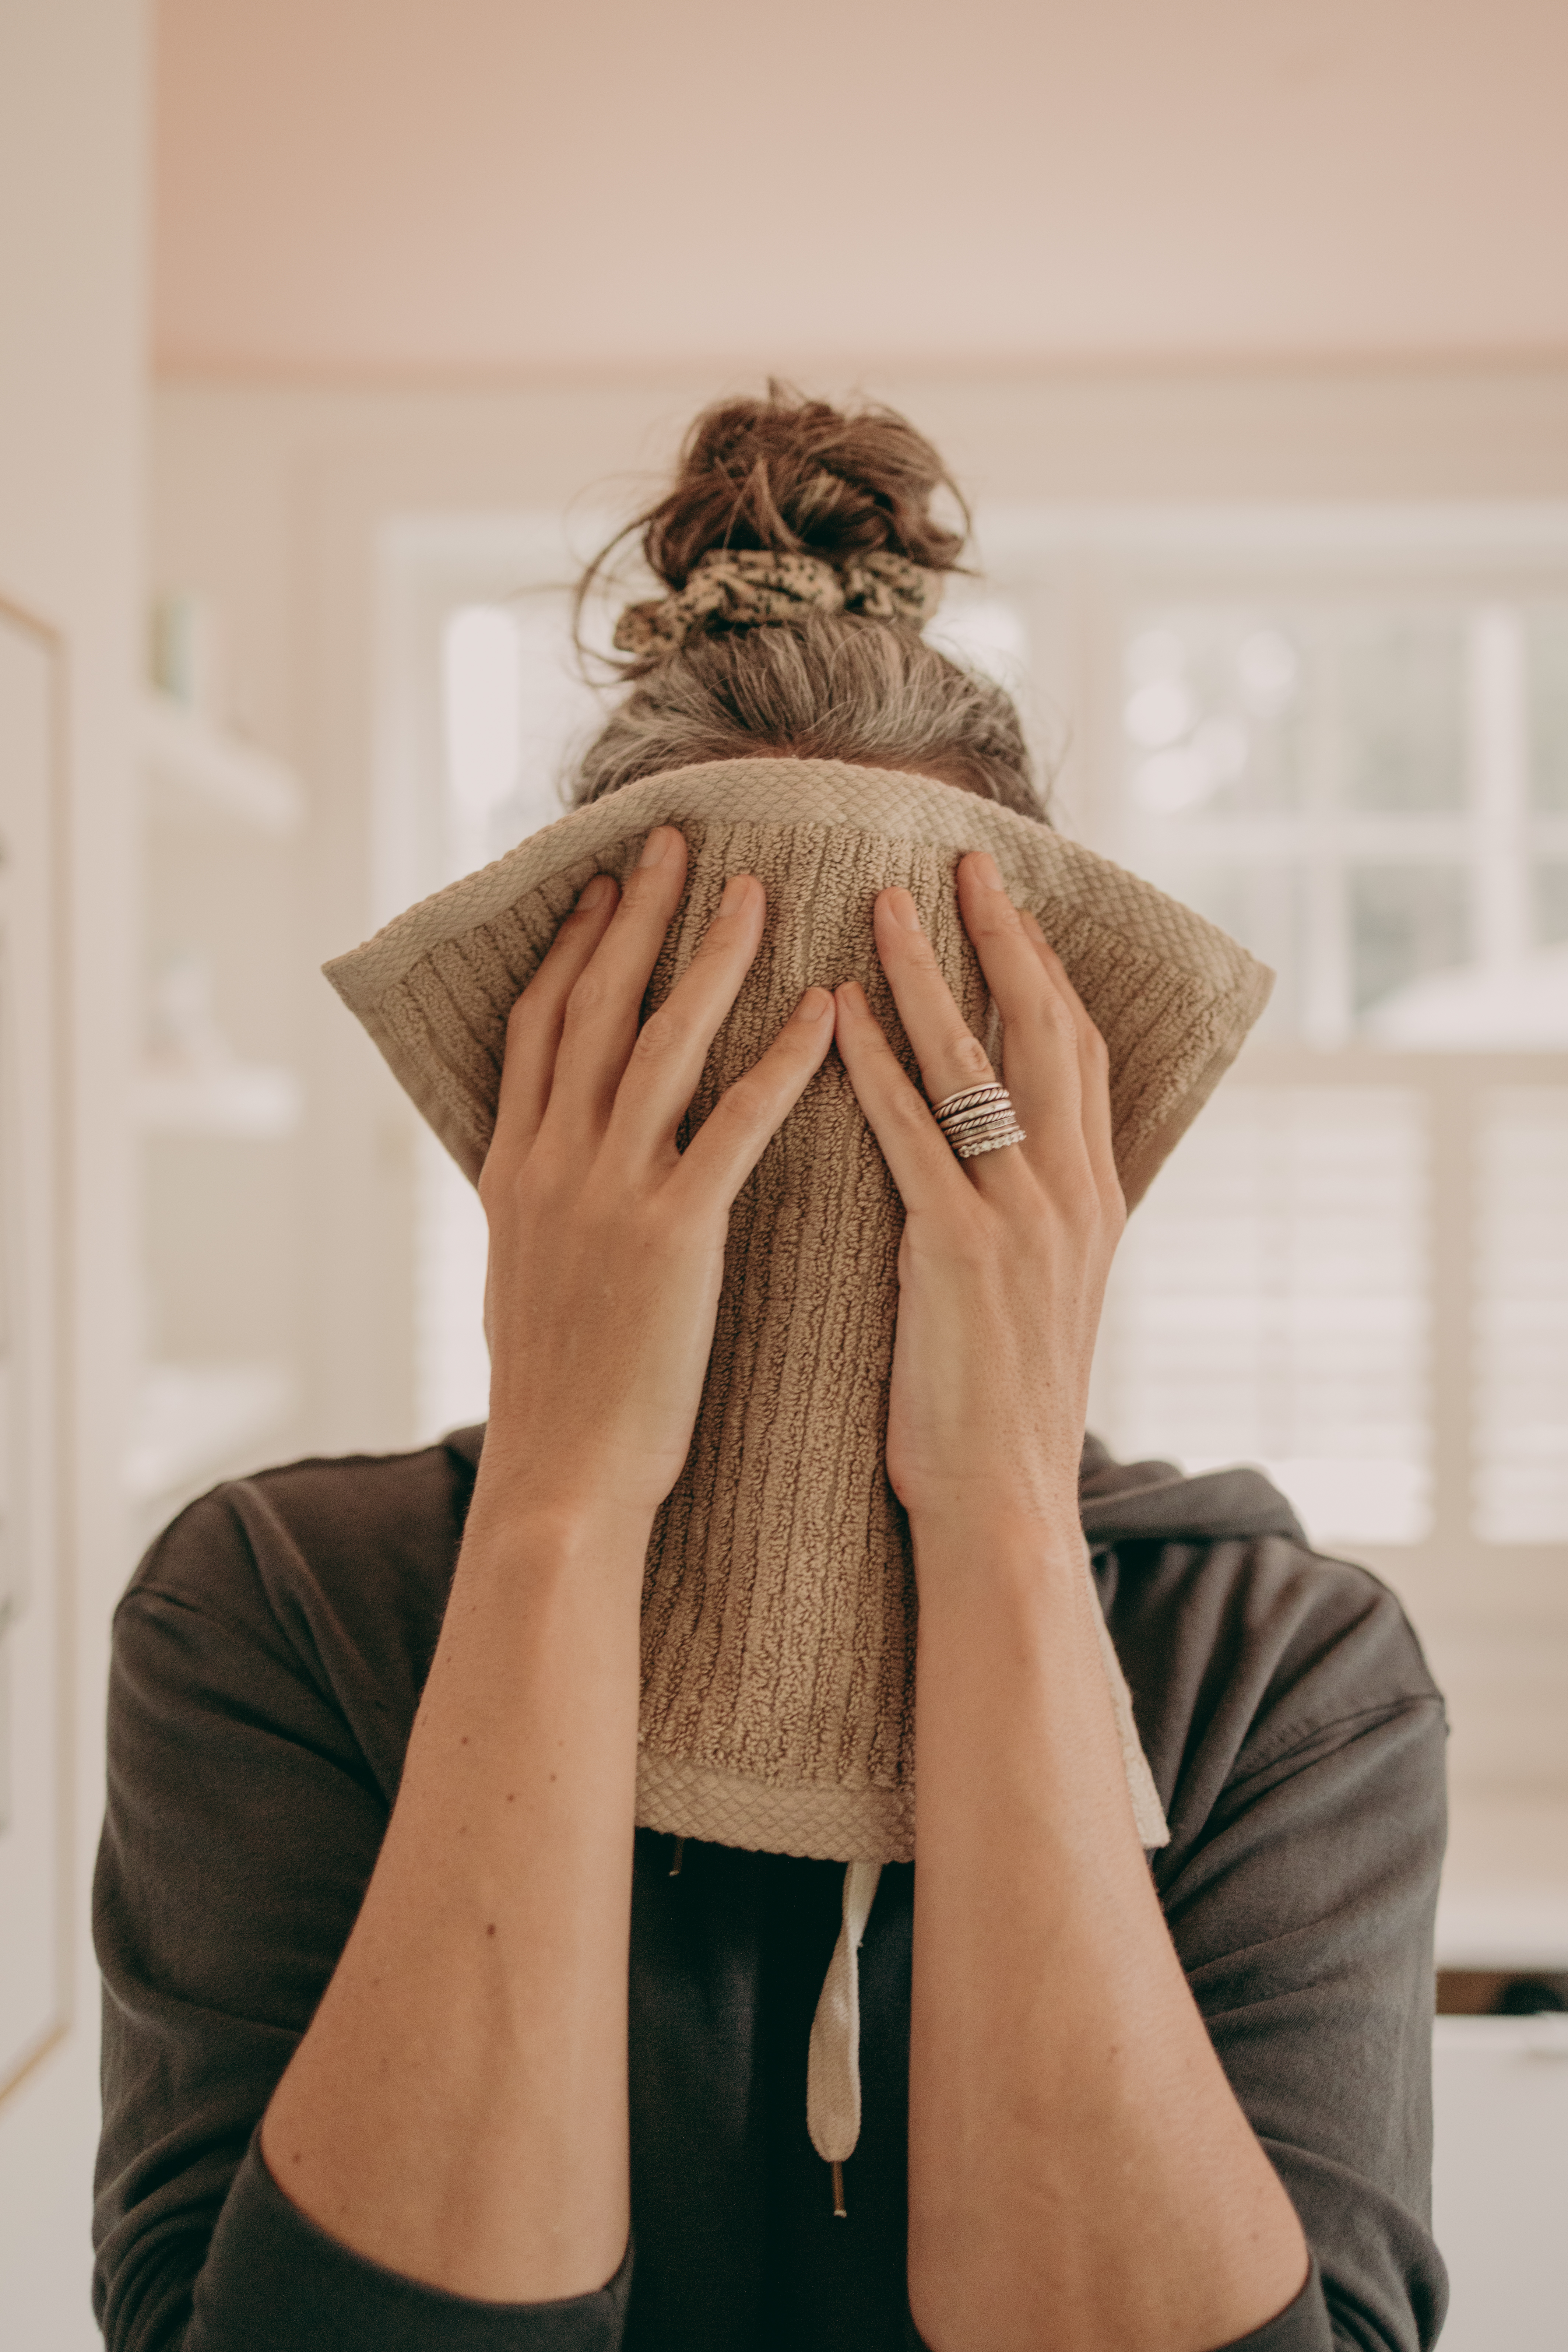 A woman holds up a towel in front of her face.